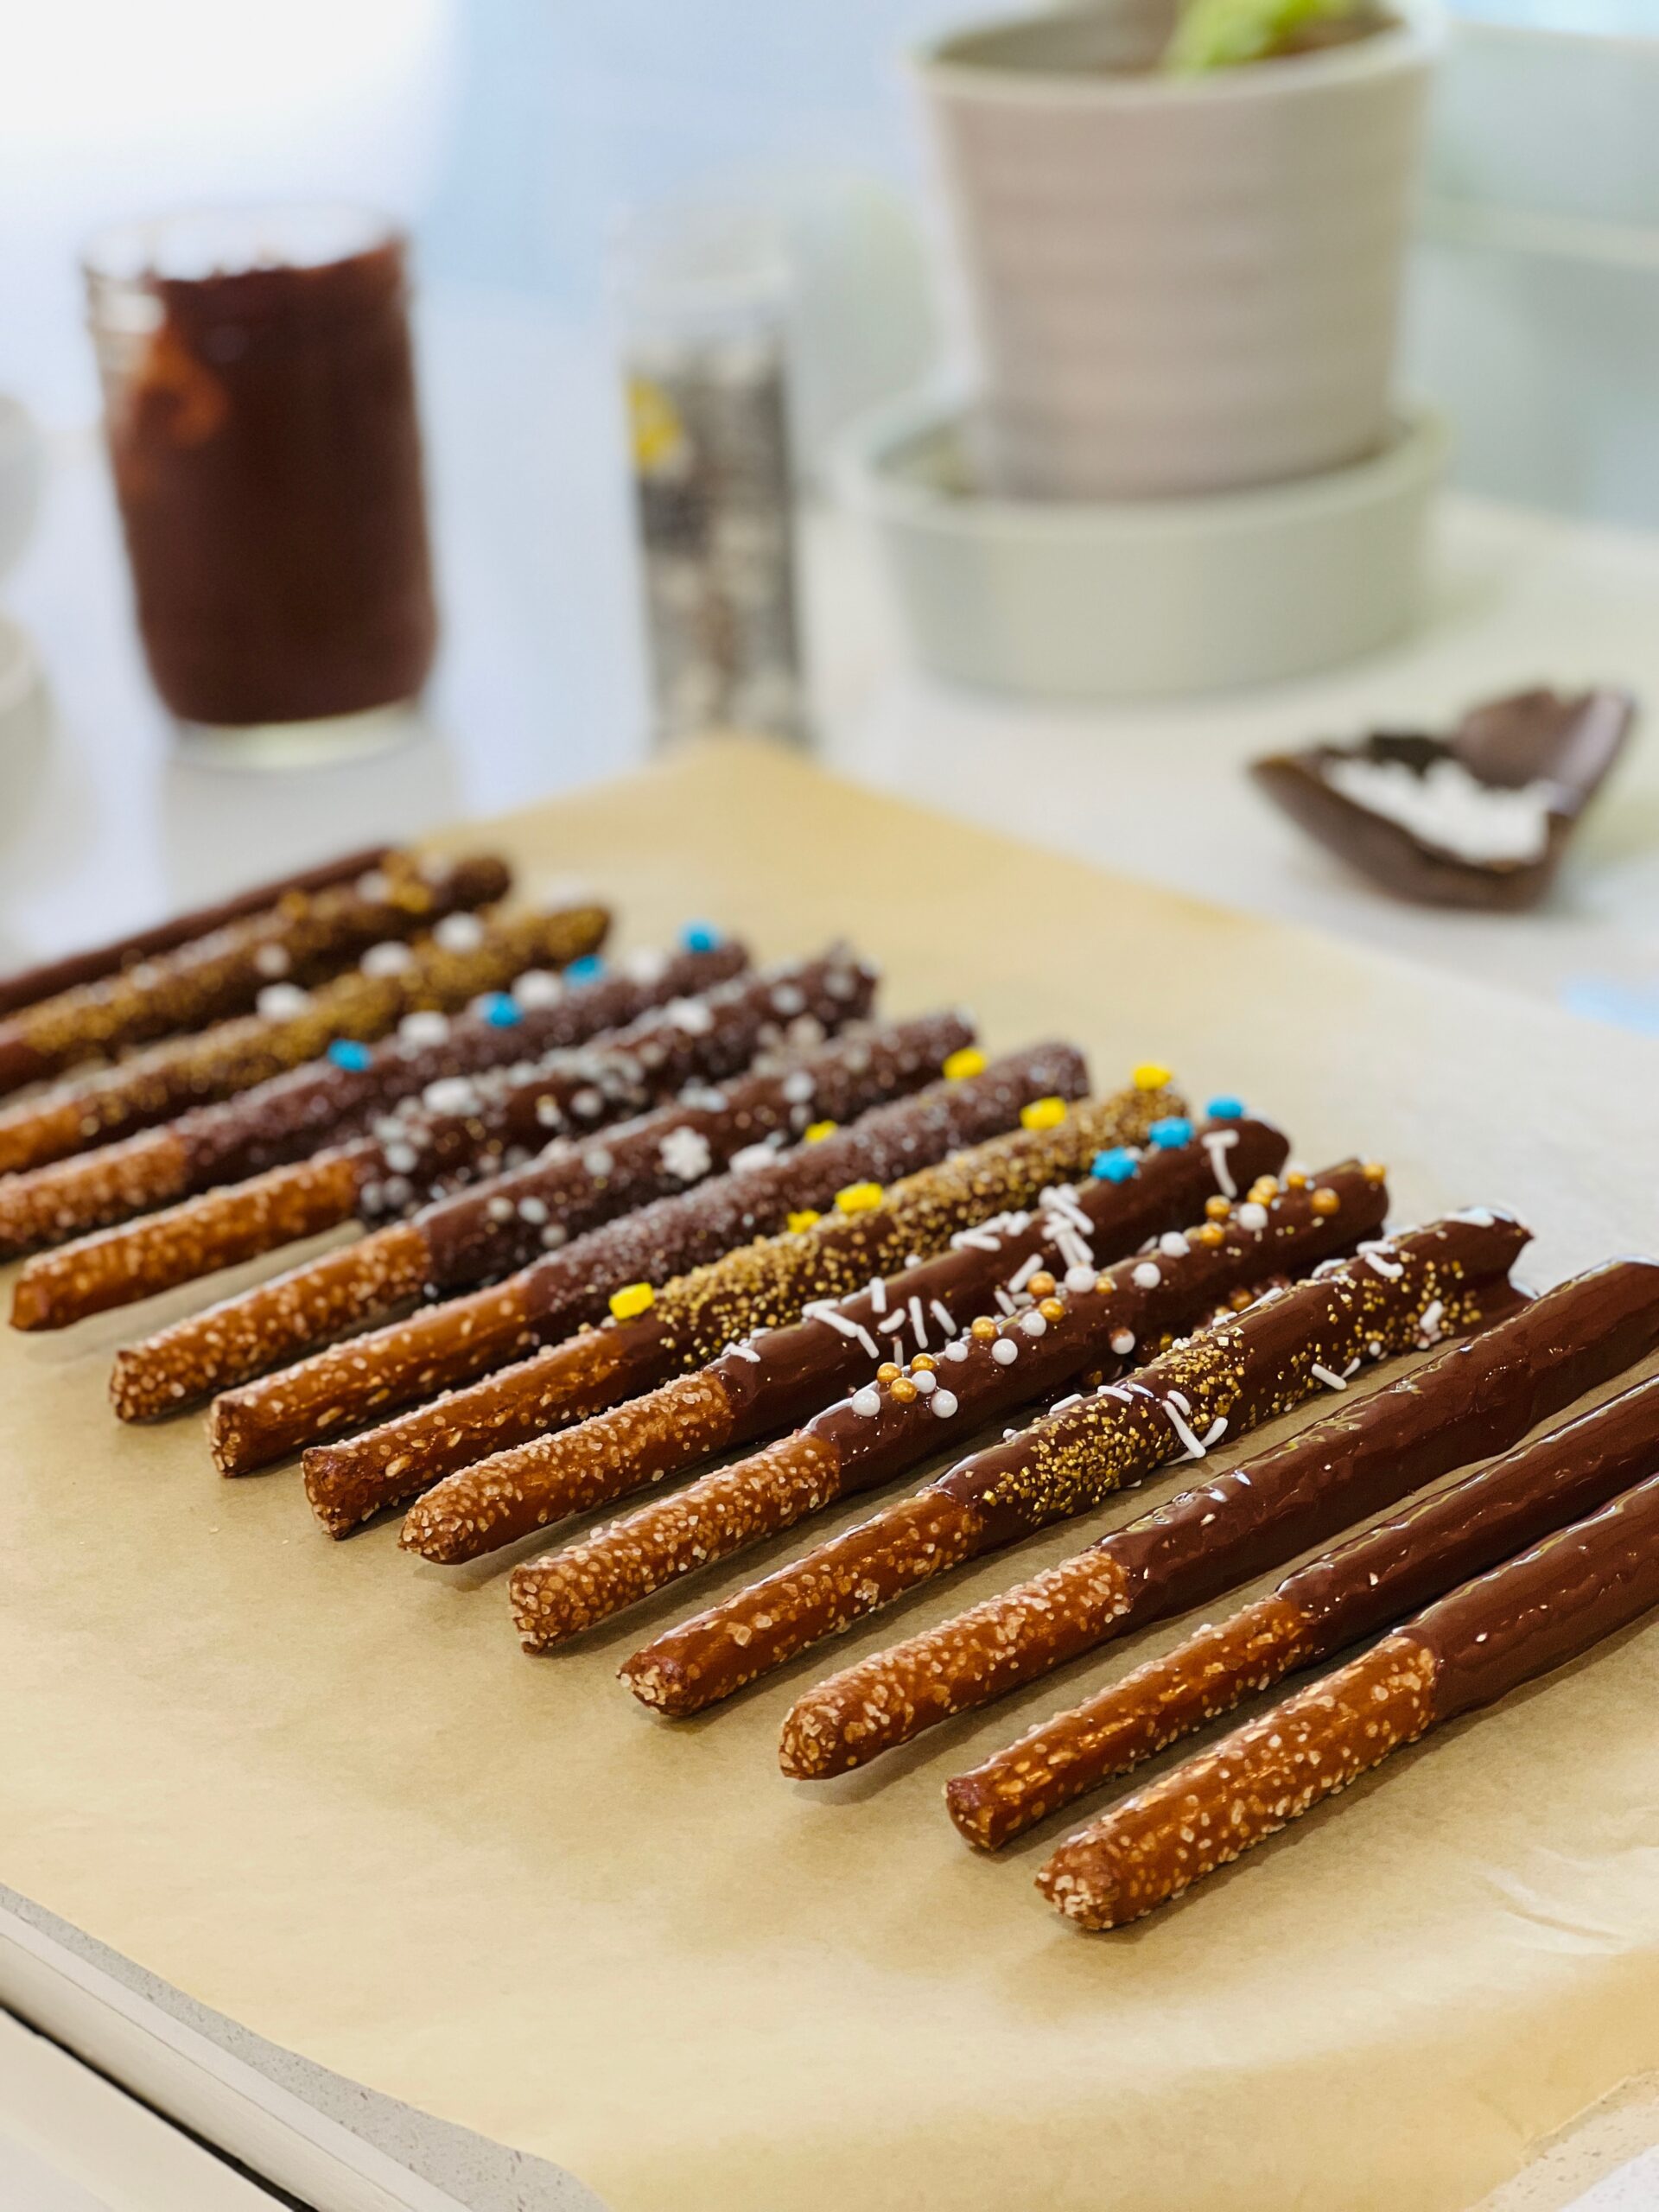 A tray of decorated vegan chocolate peanut butter pretzel wands